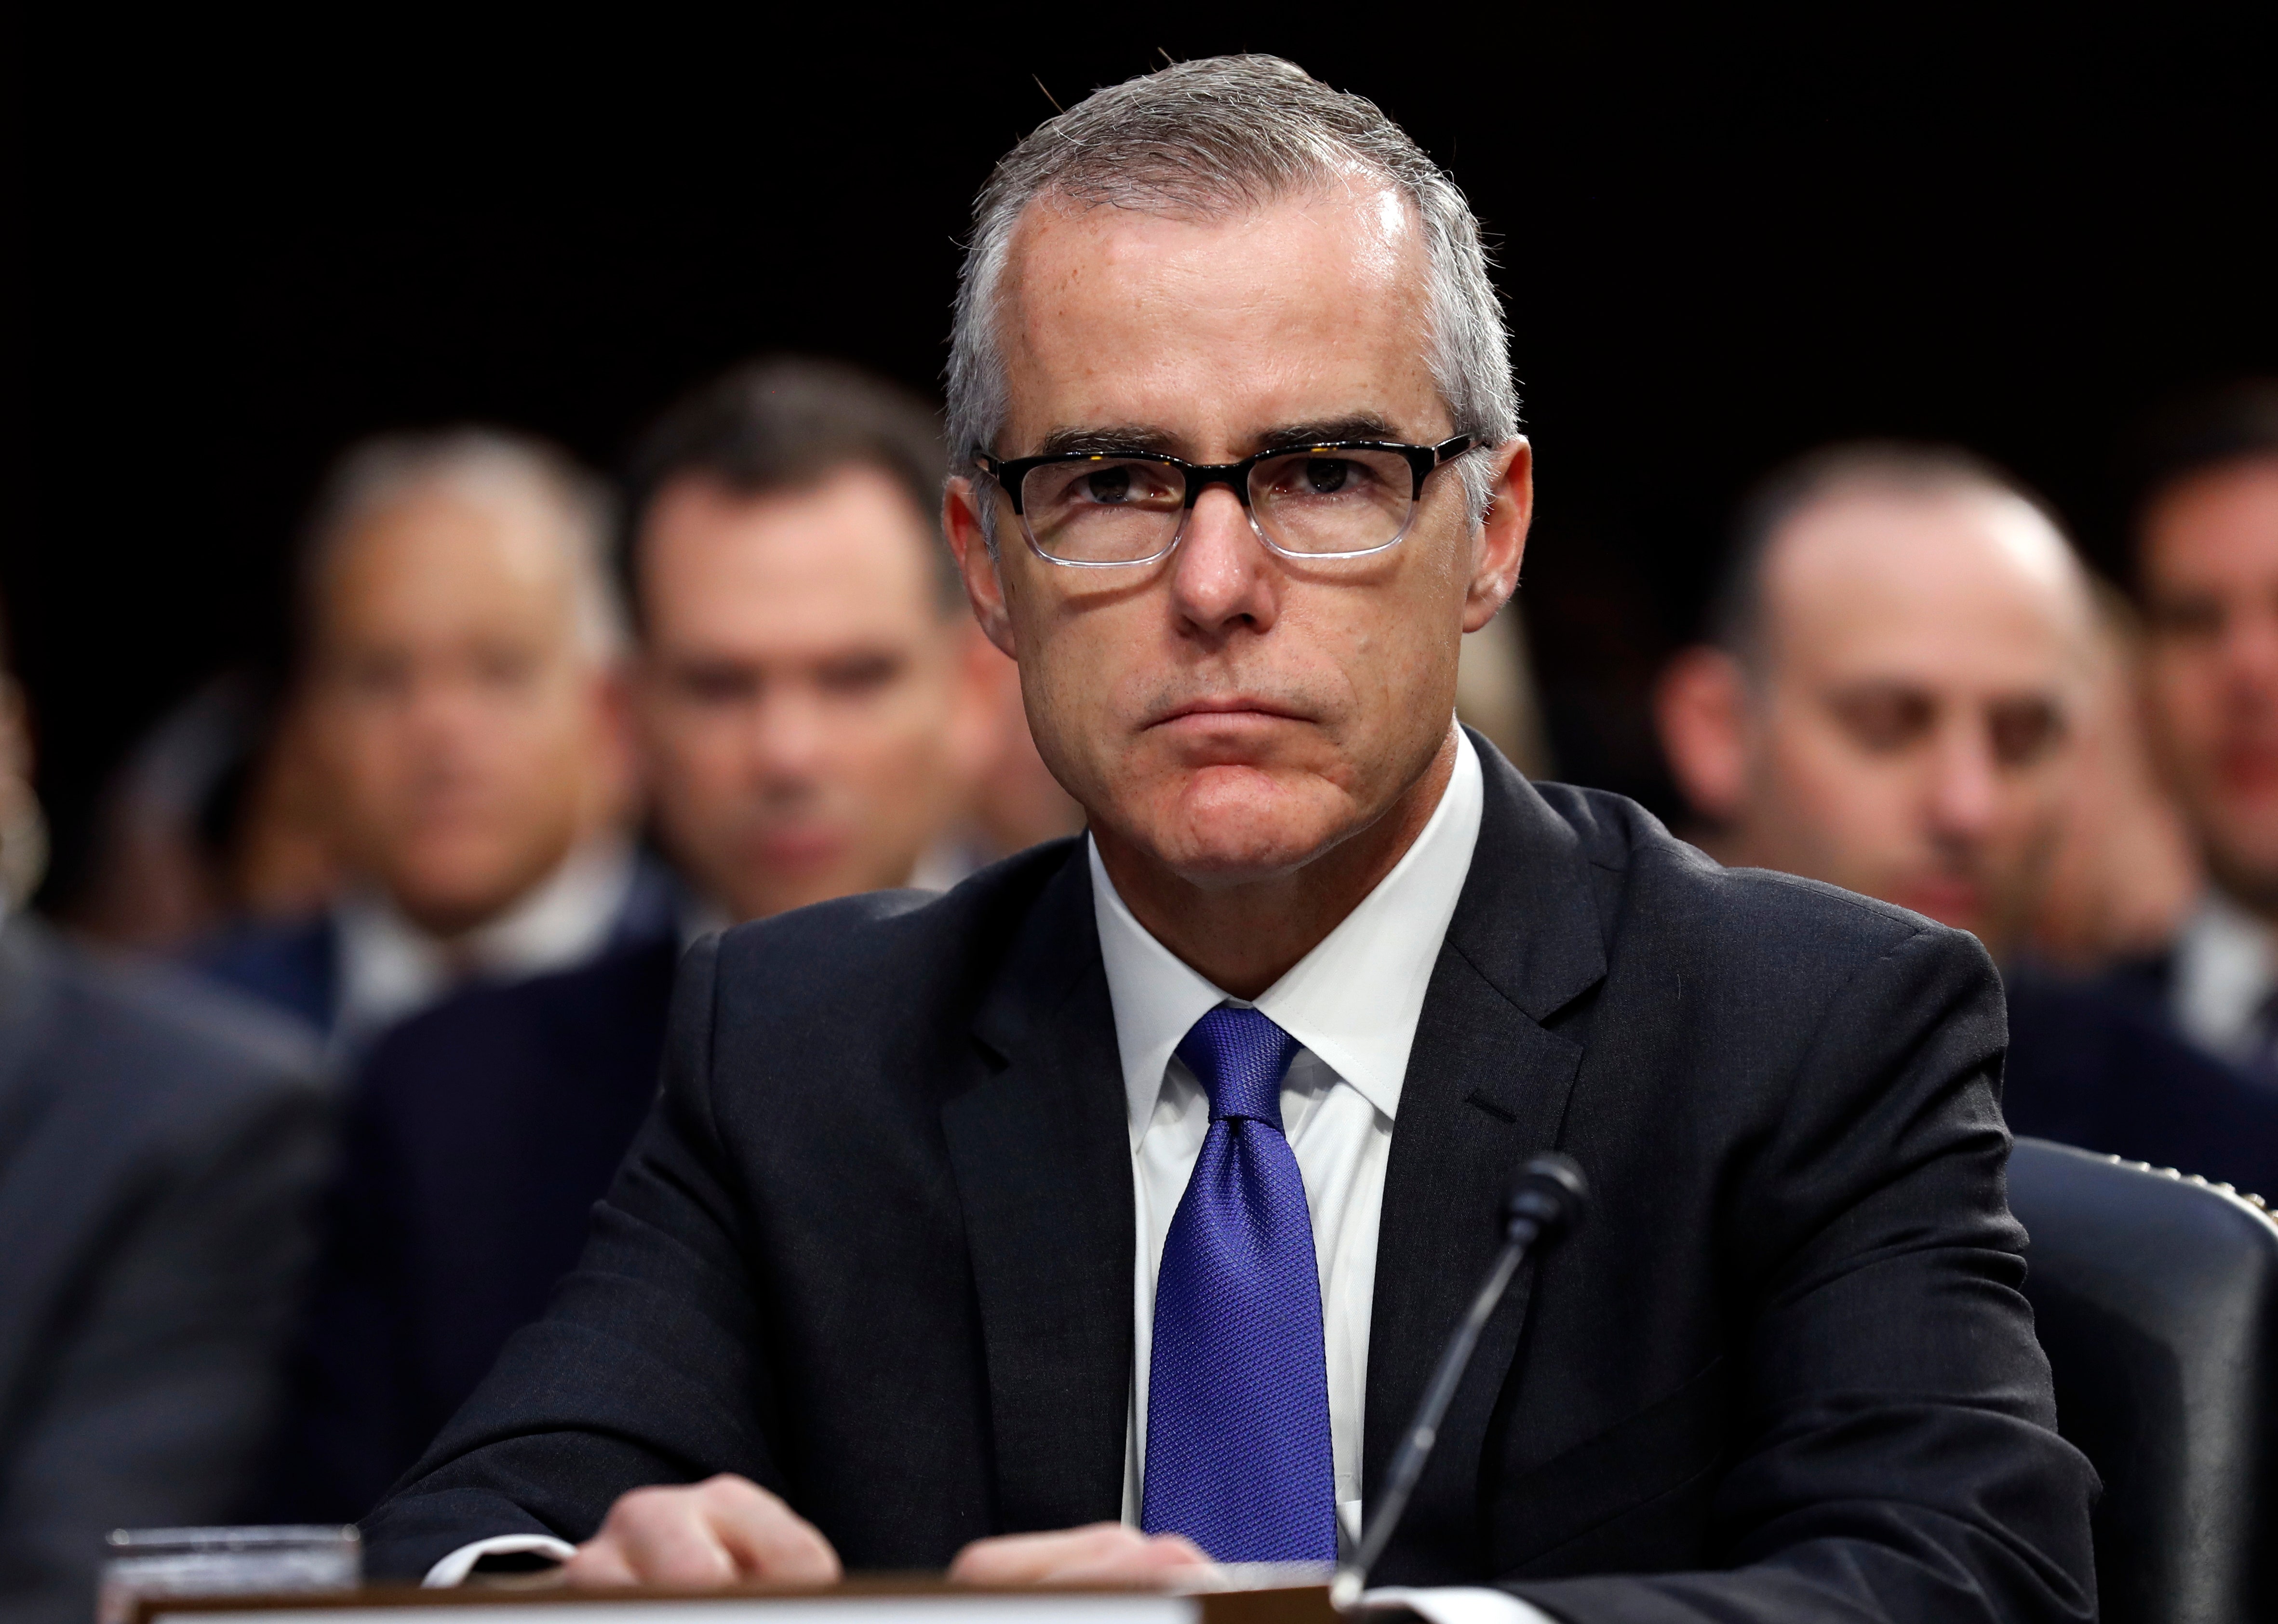 US attorney recommends proceeding with charges against McCabe, as DOJ rejects last-ditch appeal